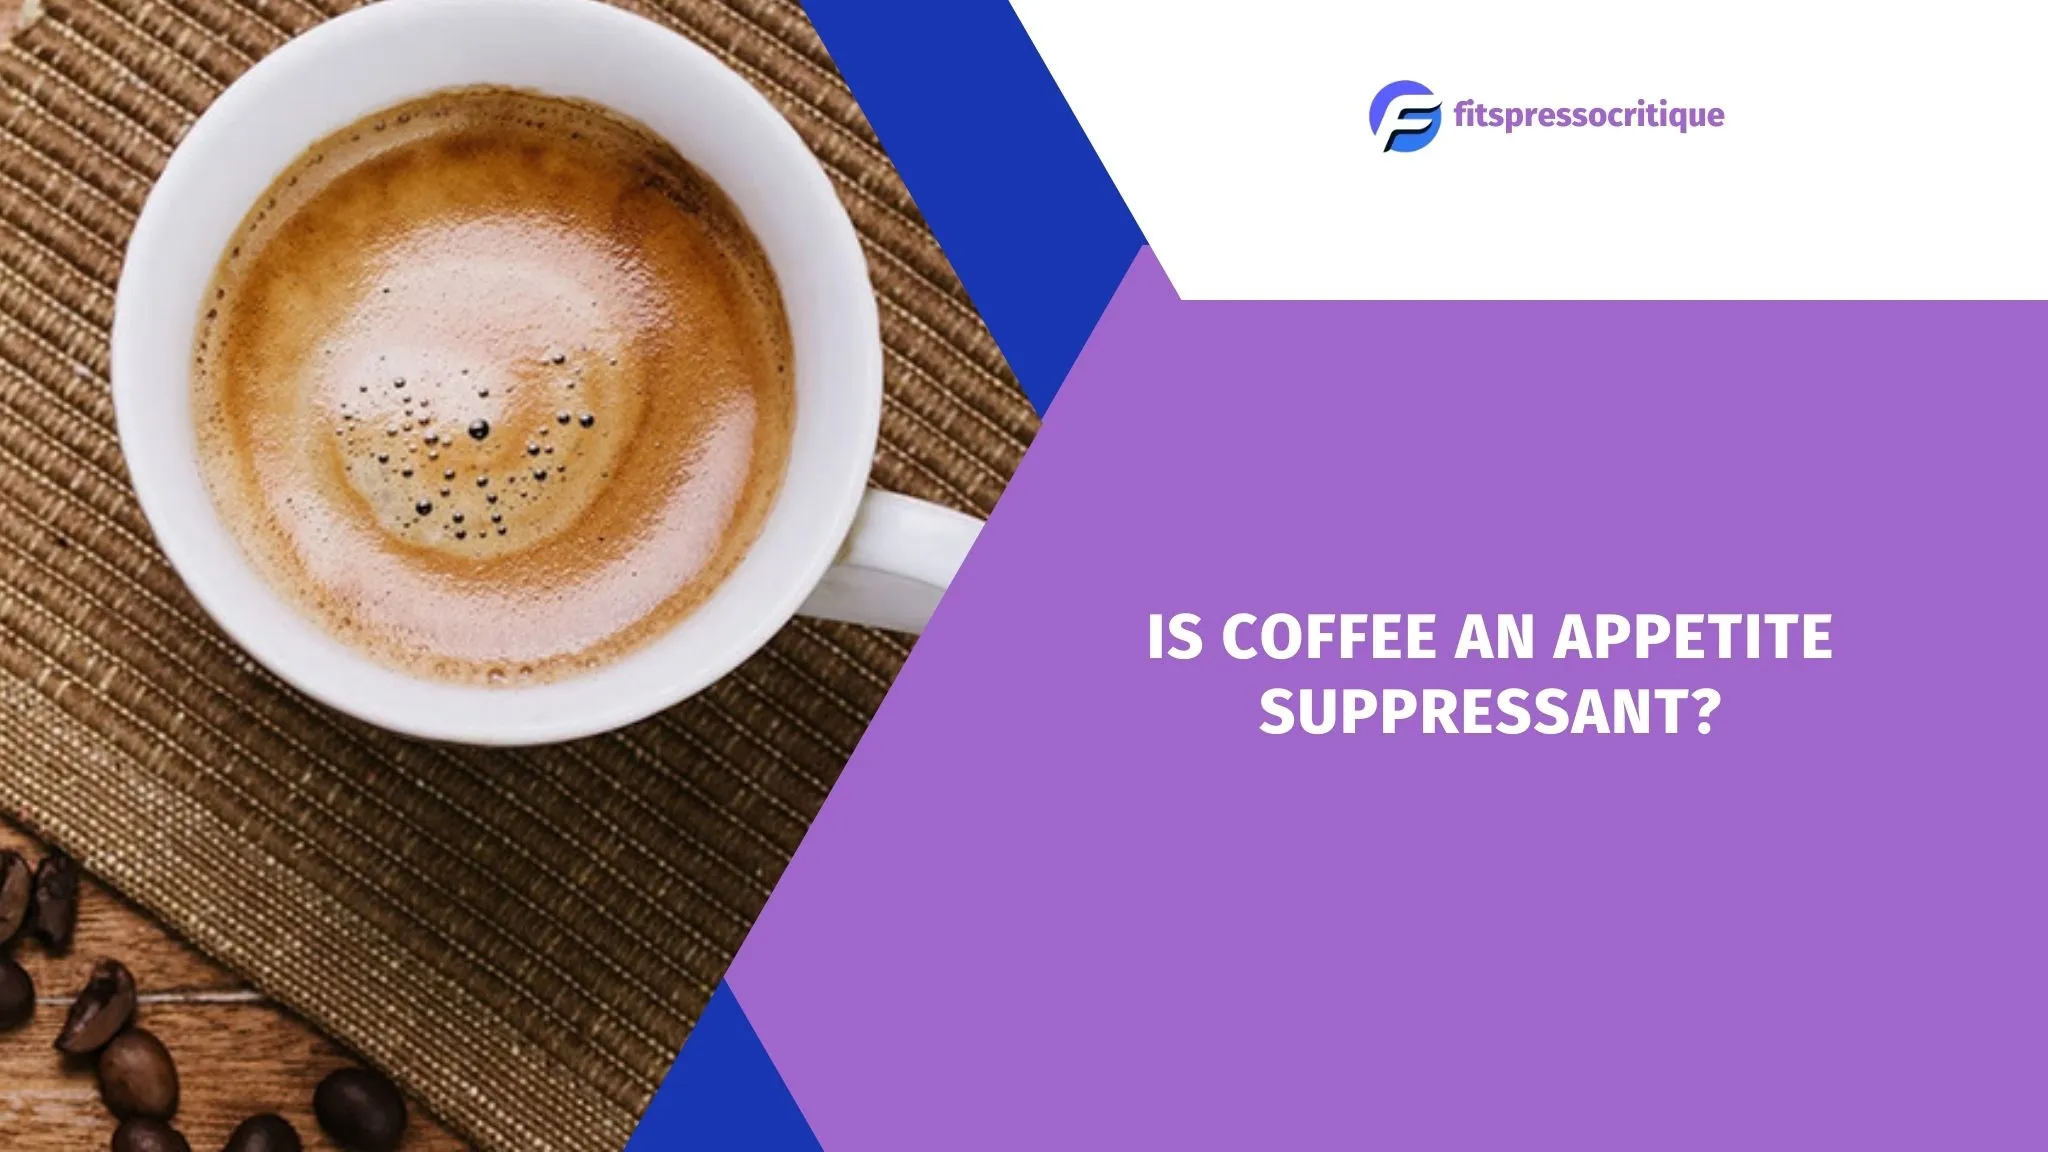 Is Coffee an Appetite Suppressant